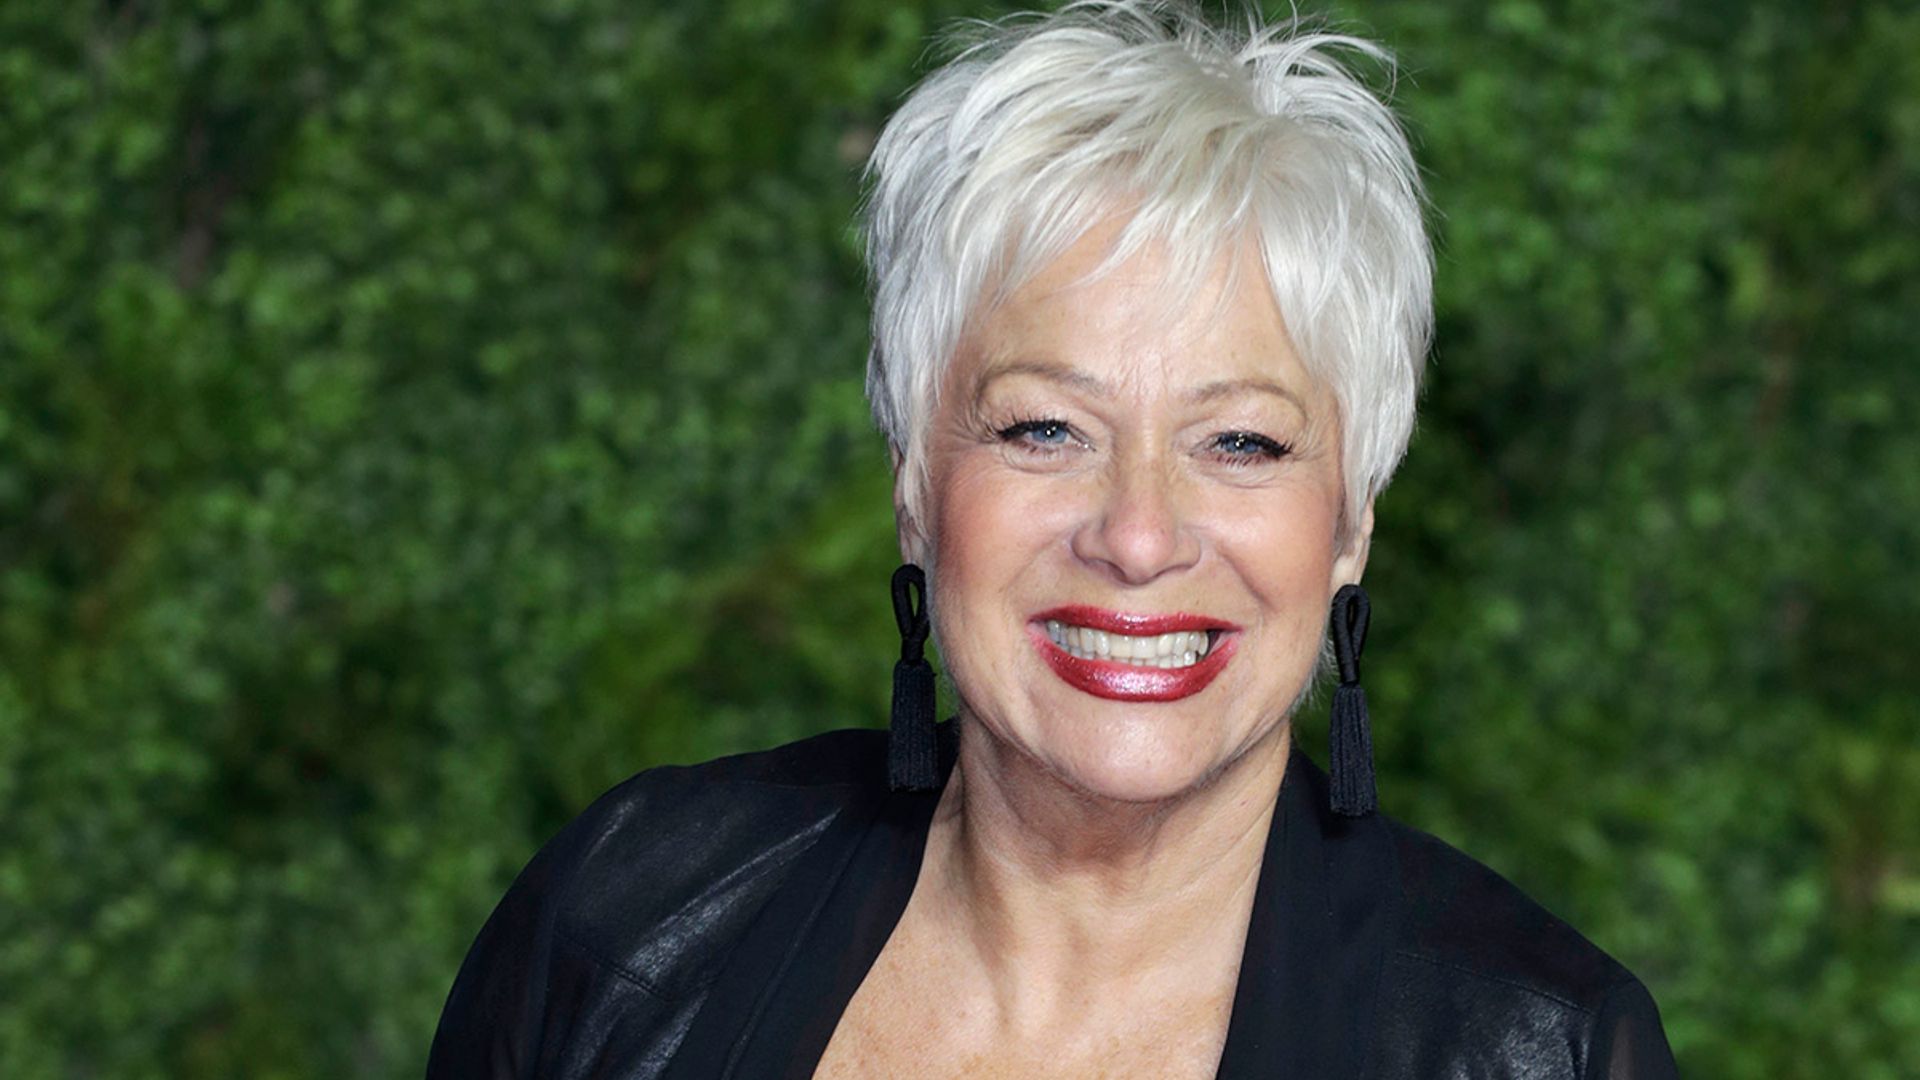 Denise Welch inundated with support after sharing physical 'struggle' – and it's so relatable